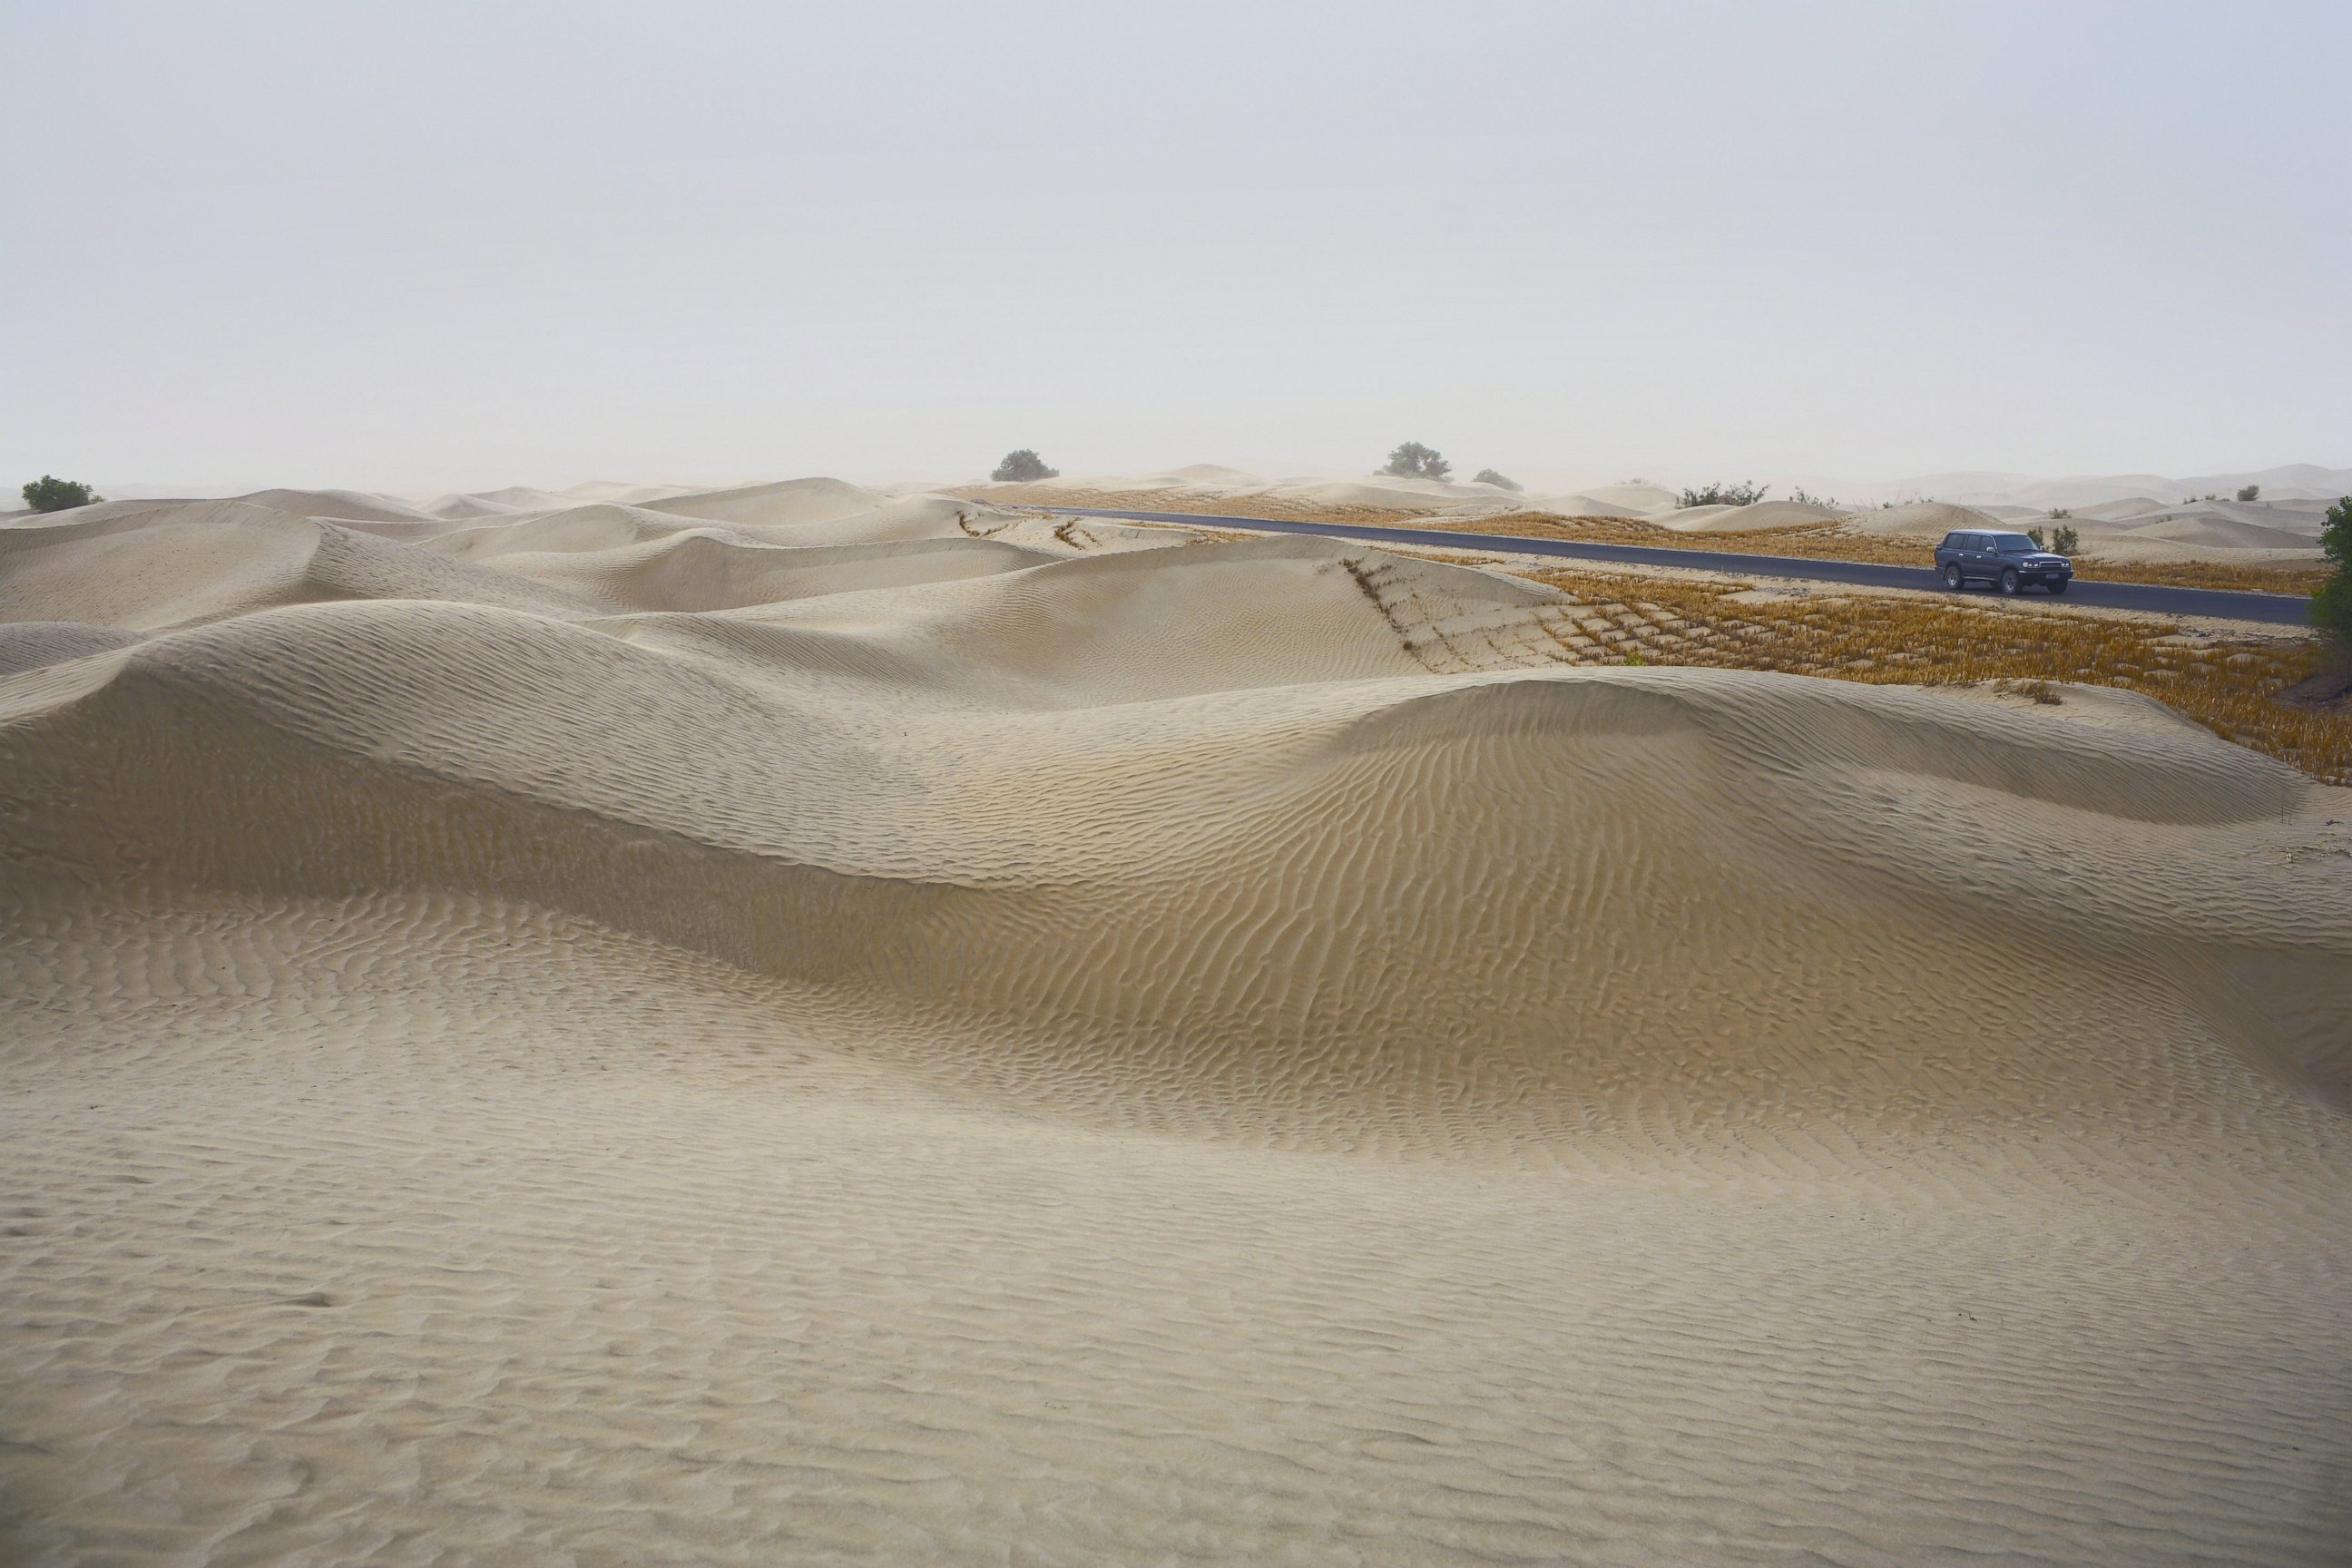 PHOTO:  A car drives past sand dunes on the newly built cross-desert highway on June 16, 2007 in the Taklamakan Desert.